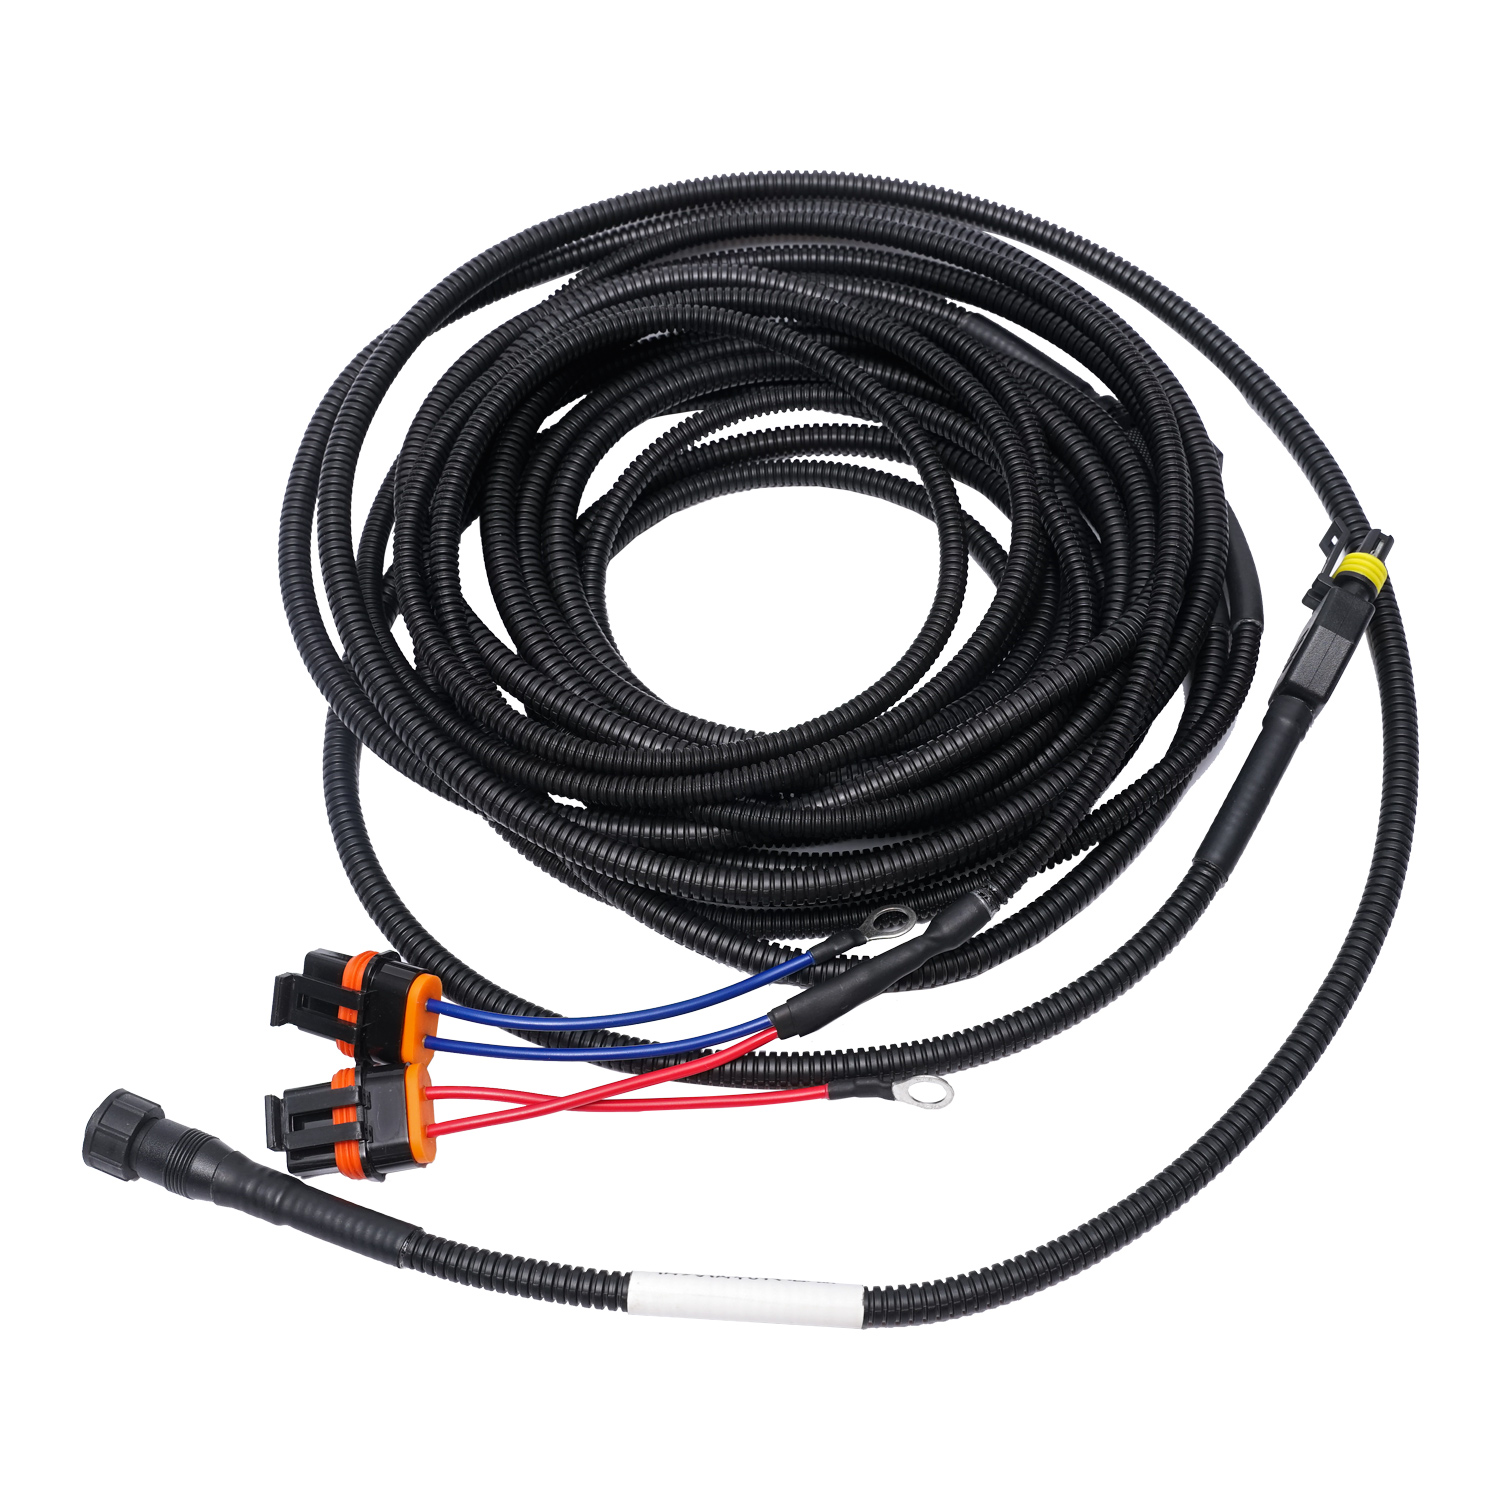 Ang PVC Pipe Waterproof Industrial Automotive Wiring Harness